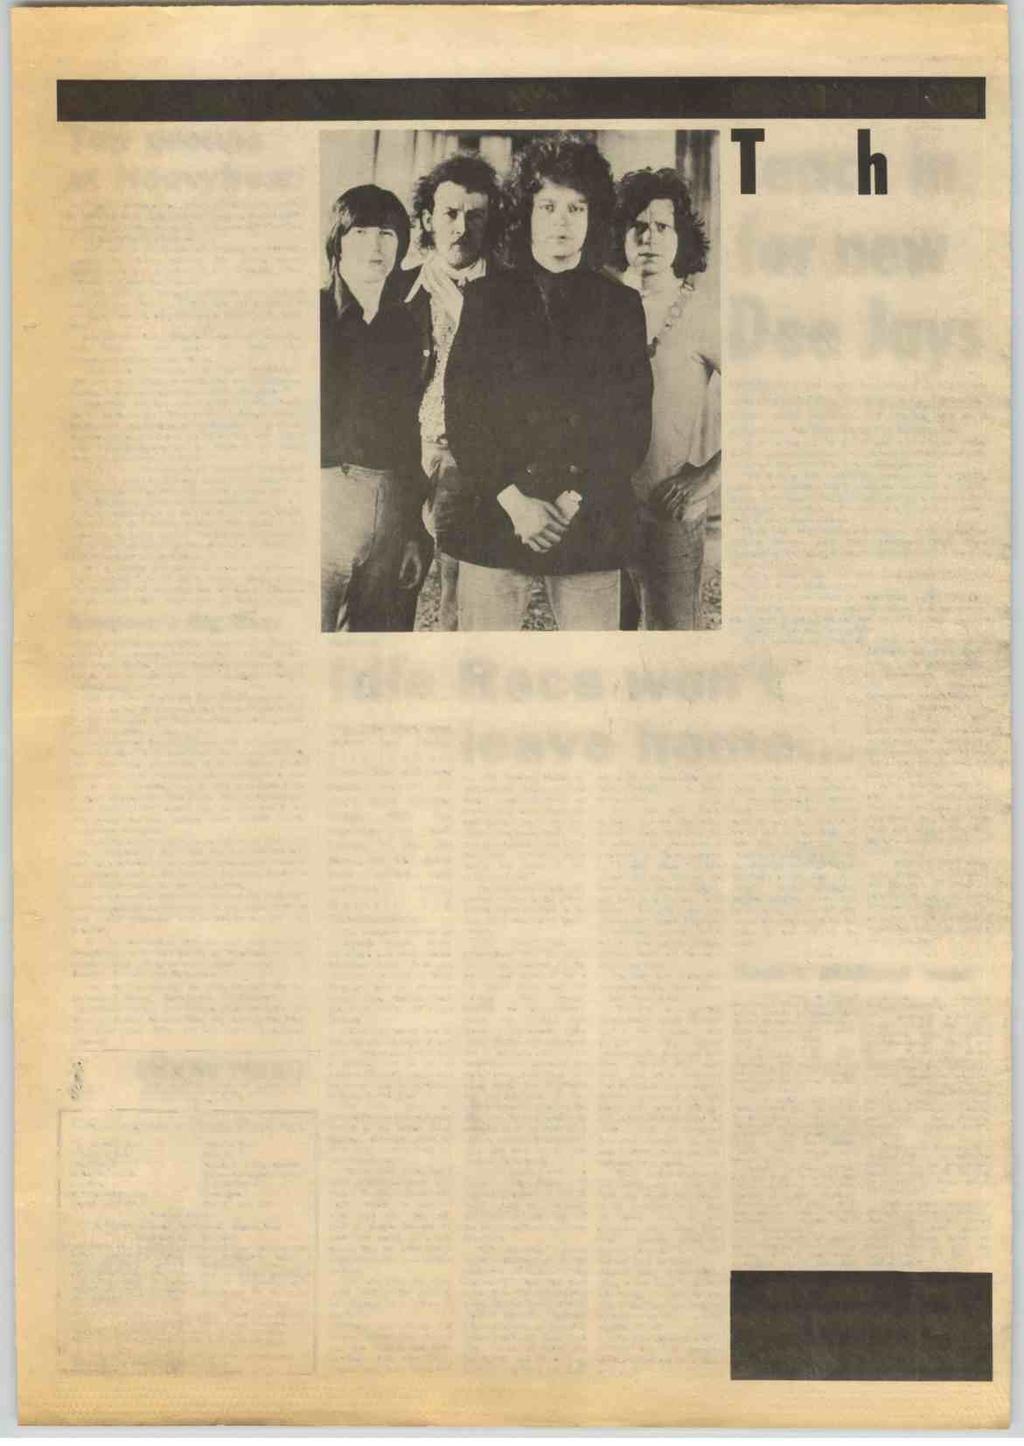 14 RECORD MIRROR, May 15, 1971 SPOTLIGHT ON YOUR TOWN Top groups at Heavyhead ONE might imagine that autograph collectors would be wasting their time hanging around a record shop.